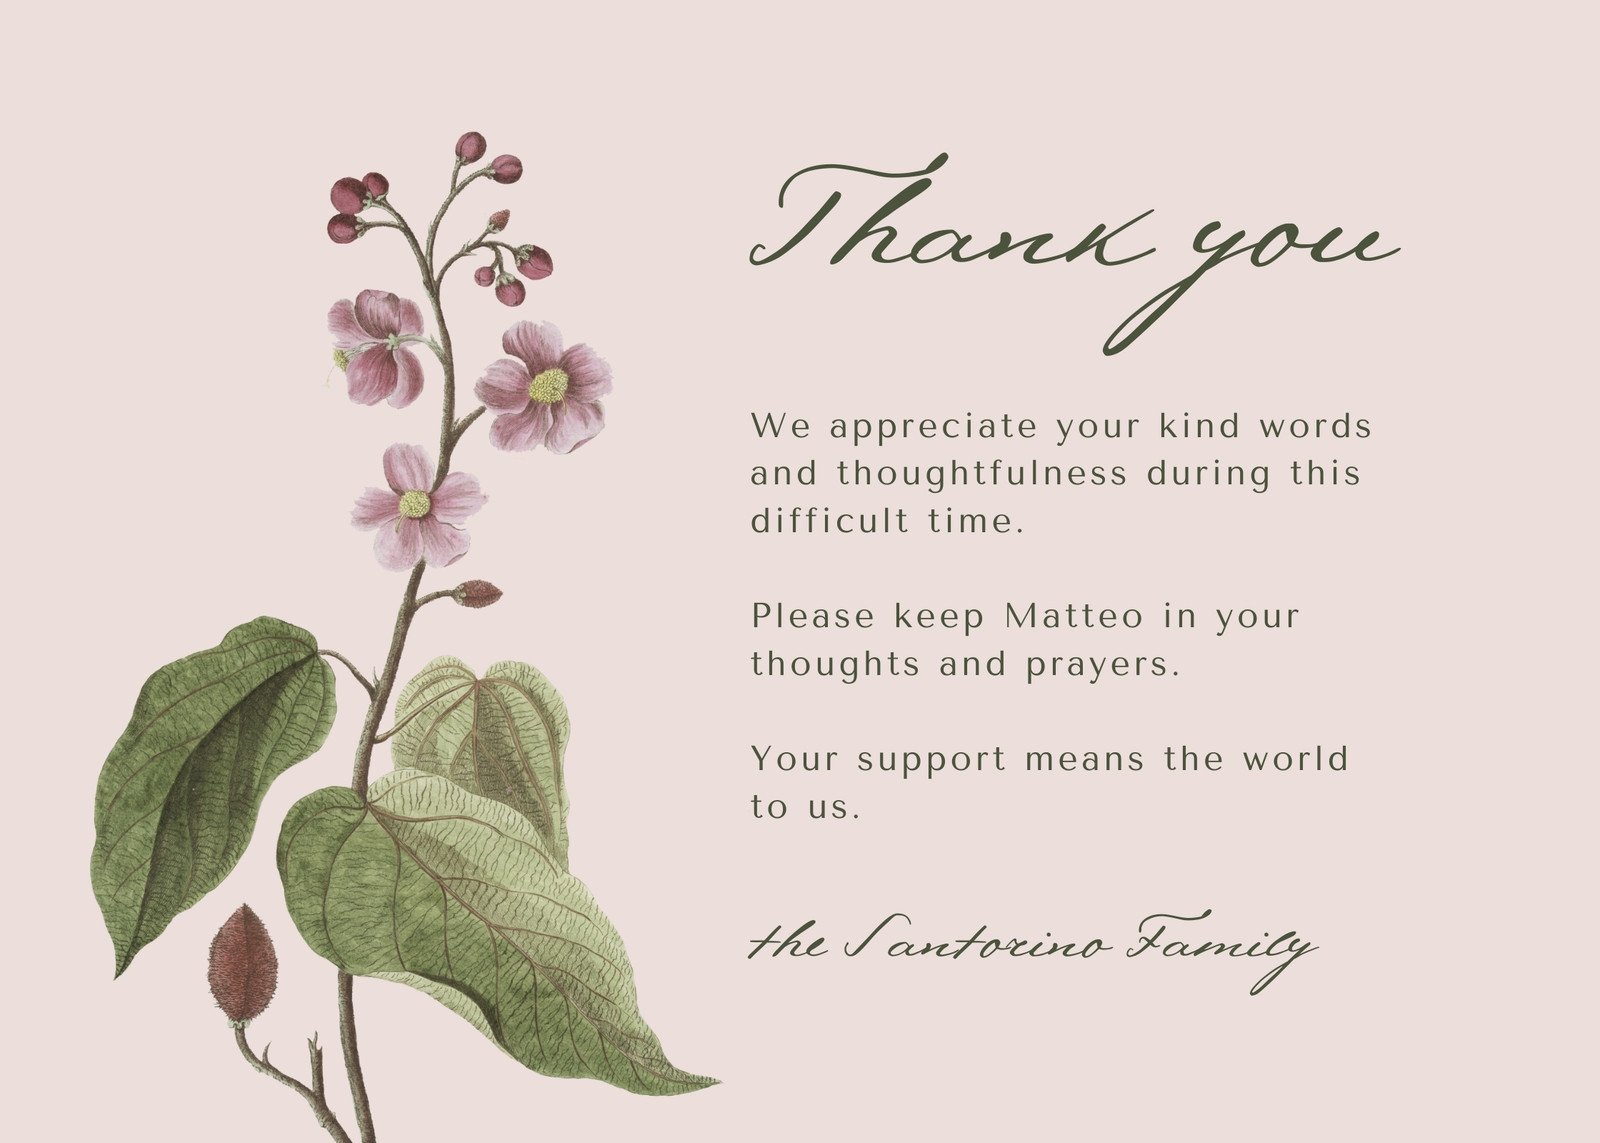 Free, printable funeral thank you card templates to customize | Canva